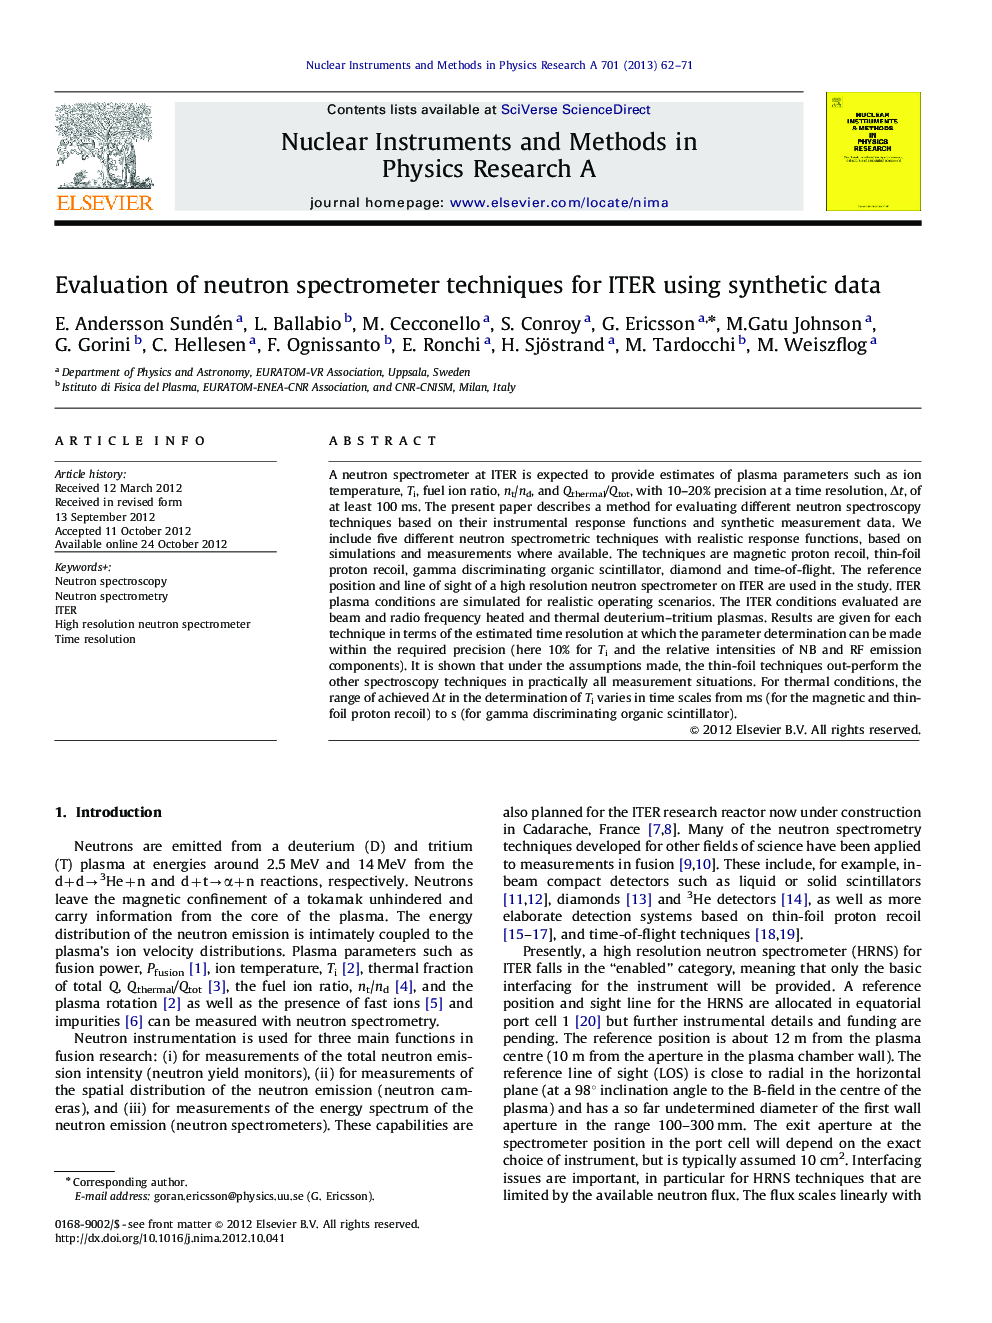 Evaluation of neutron spectrometer techniques for ITER using synthetic data